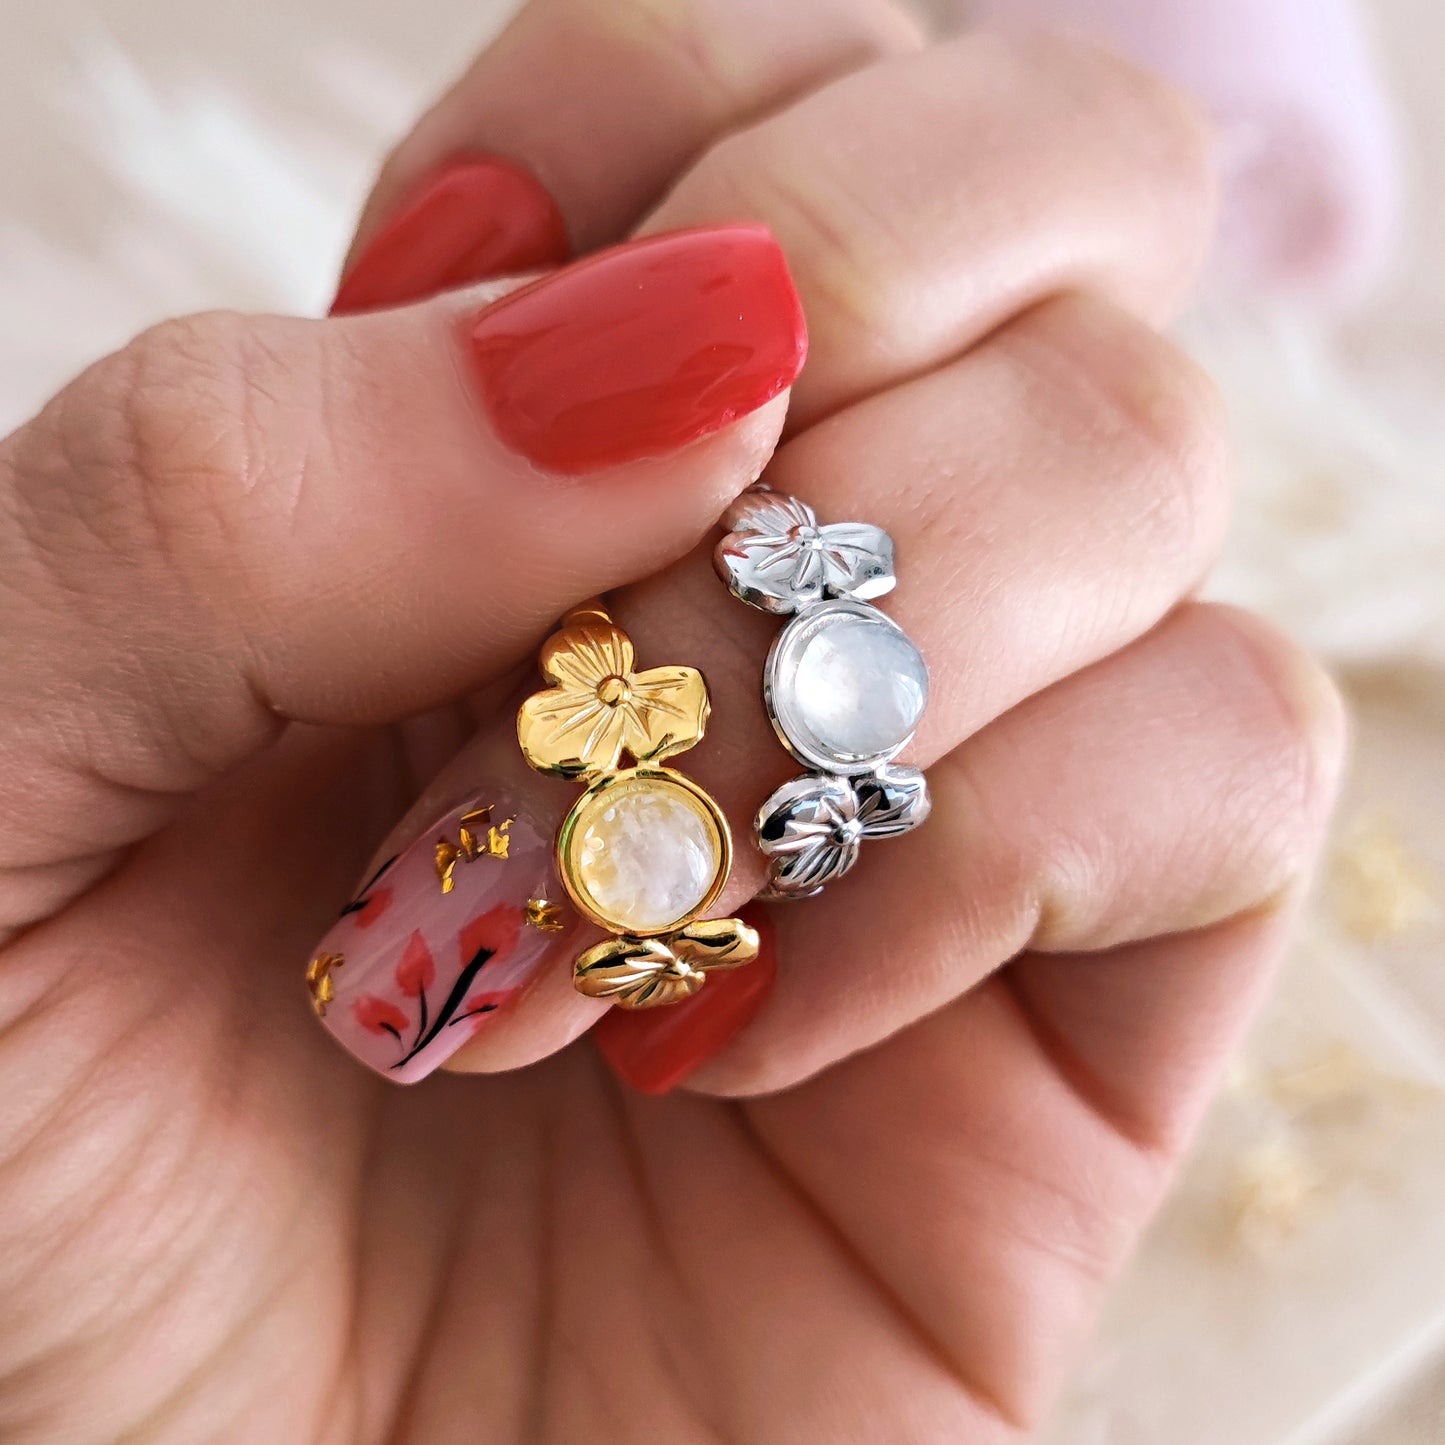 Floral Ring with Moonstone, Fairycore Aesthetic Ring // FLORA